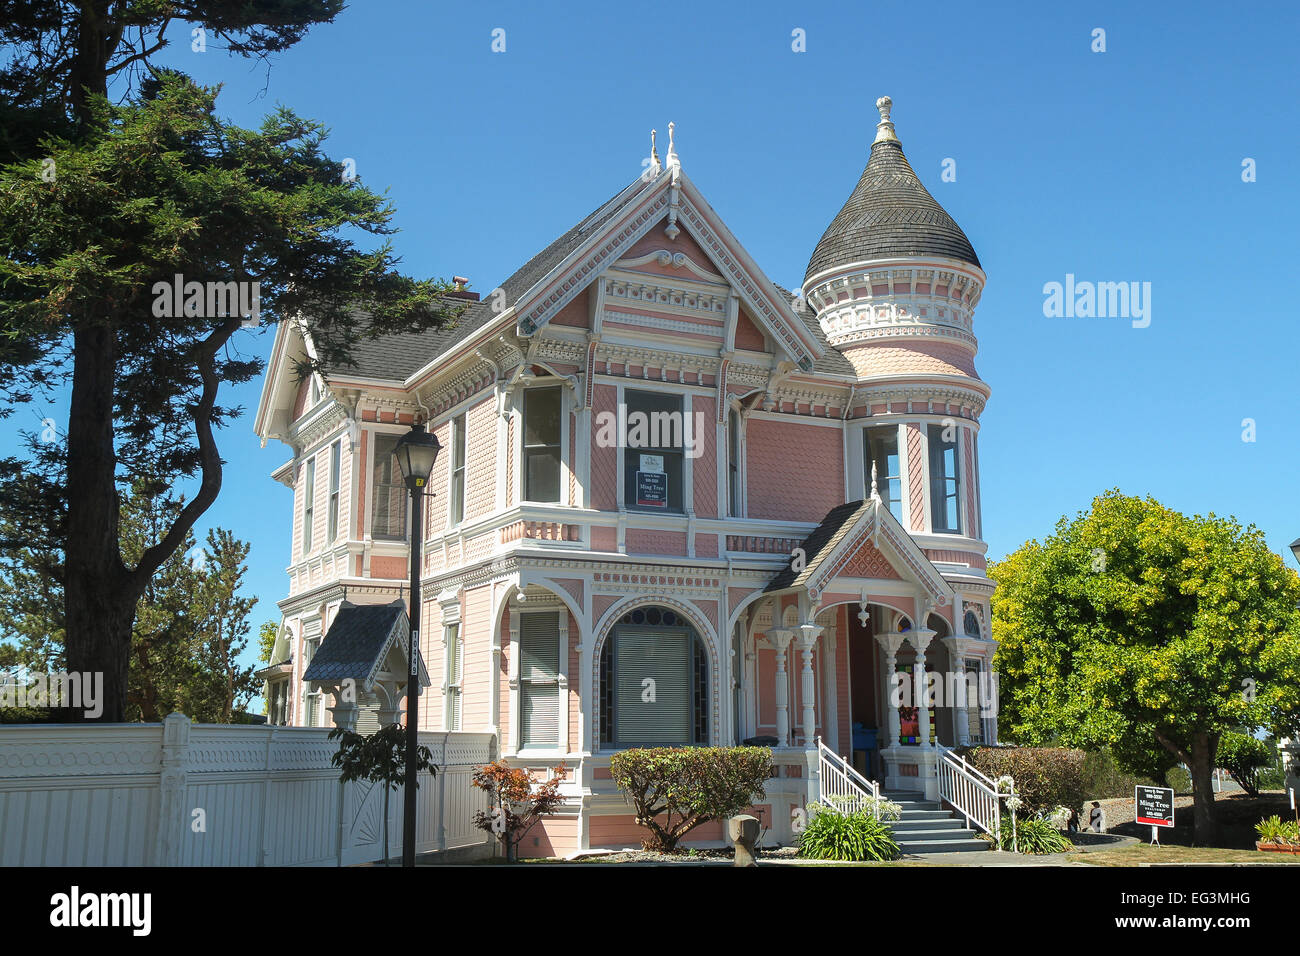 A pink Victorian home in Eureka, California, United States Stock Photo